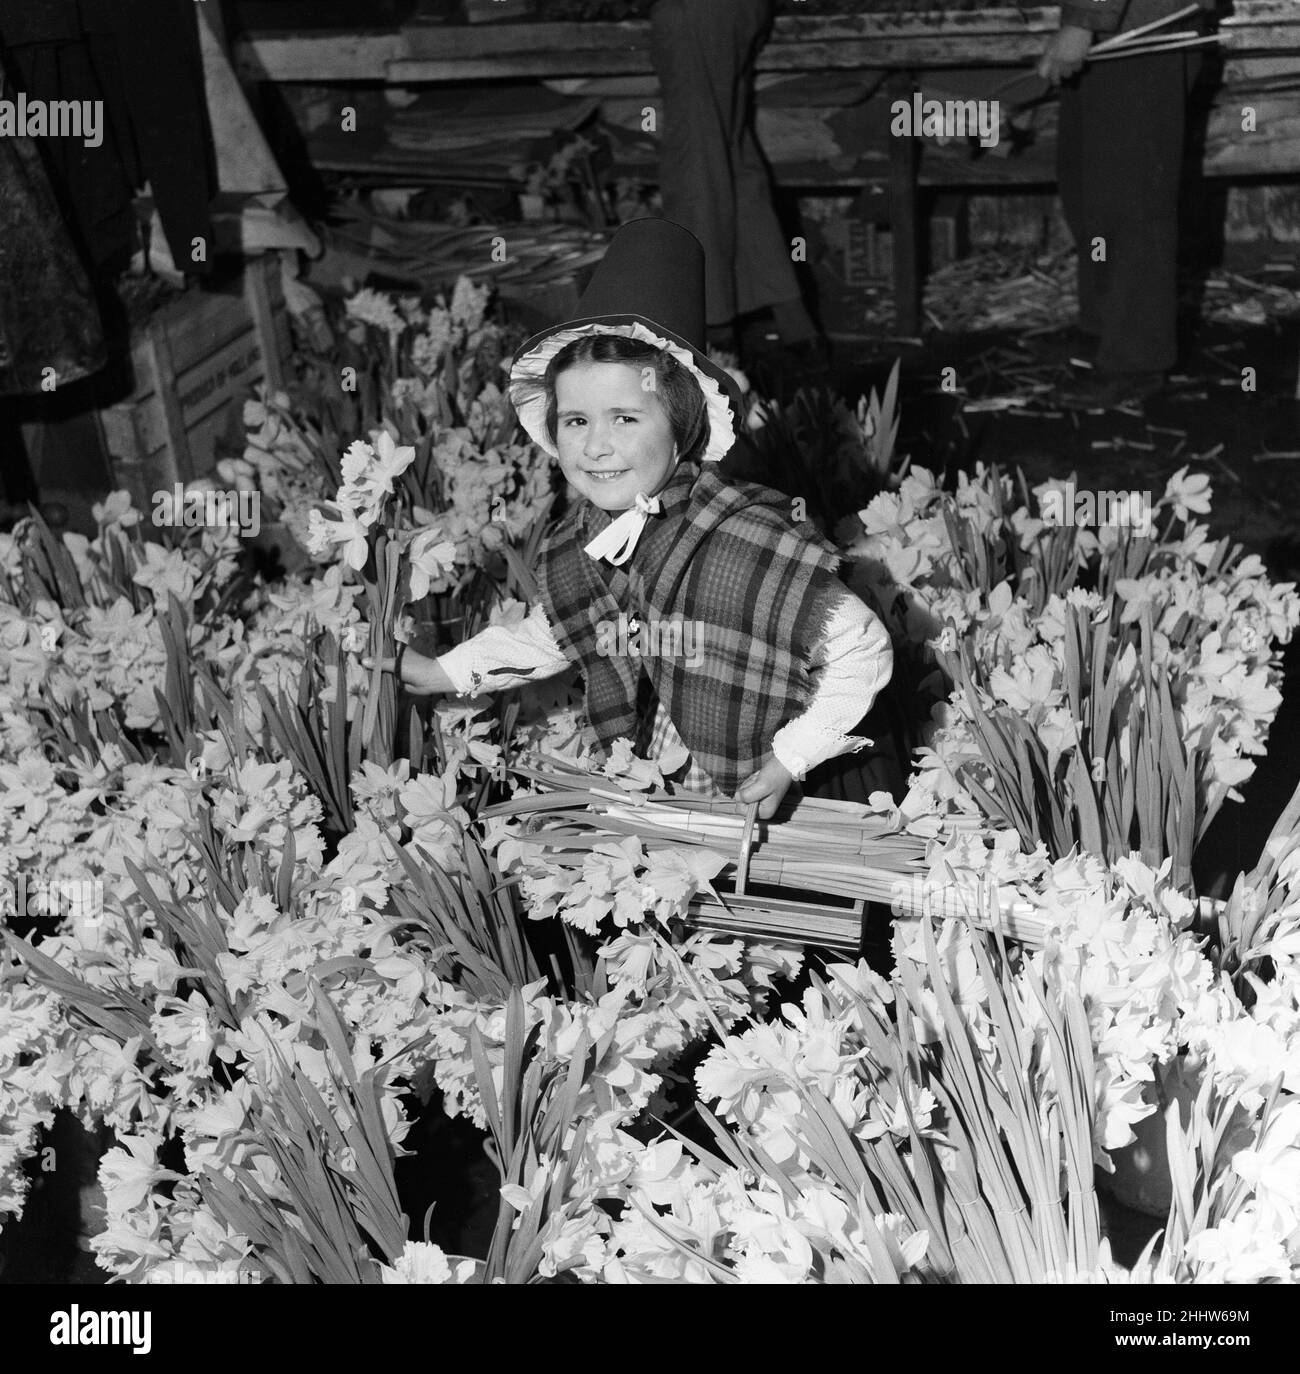 Melanie Rogers, aged 5, wearing traditional Welsh costume on her way to school stopped off to buy a daffodil for her teacher. Her winning smile charmed the florist who invited her to 'take as many as you can carry'. Here she is helping herself in Cardiff. 1st March 1955. Stock Photo